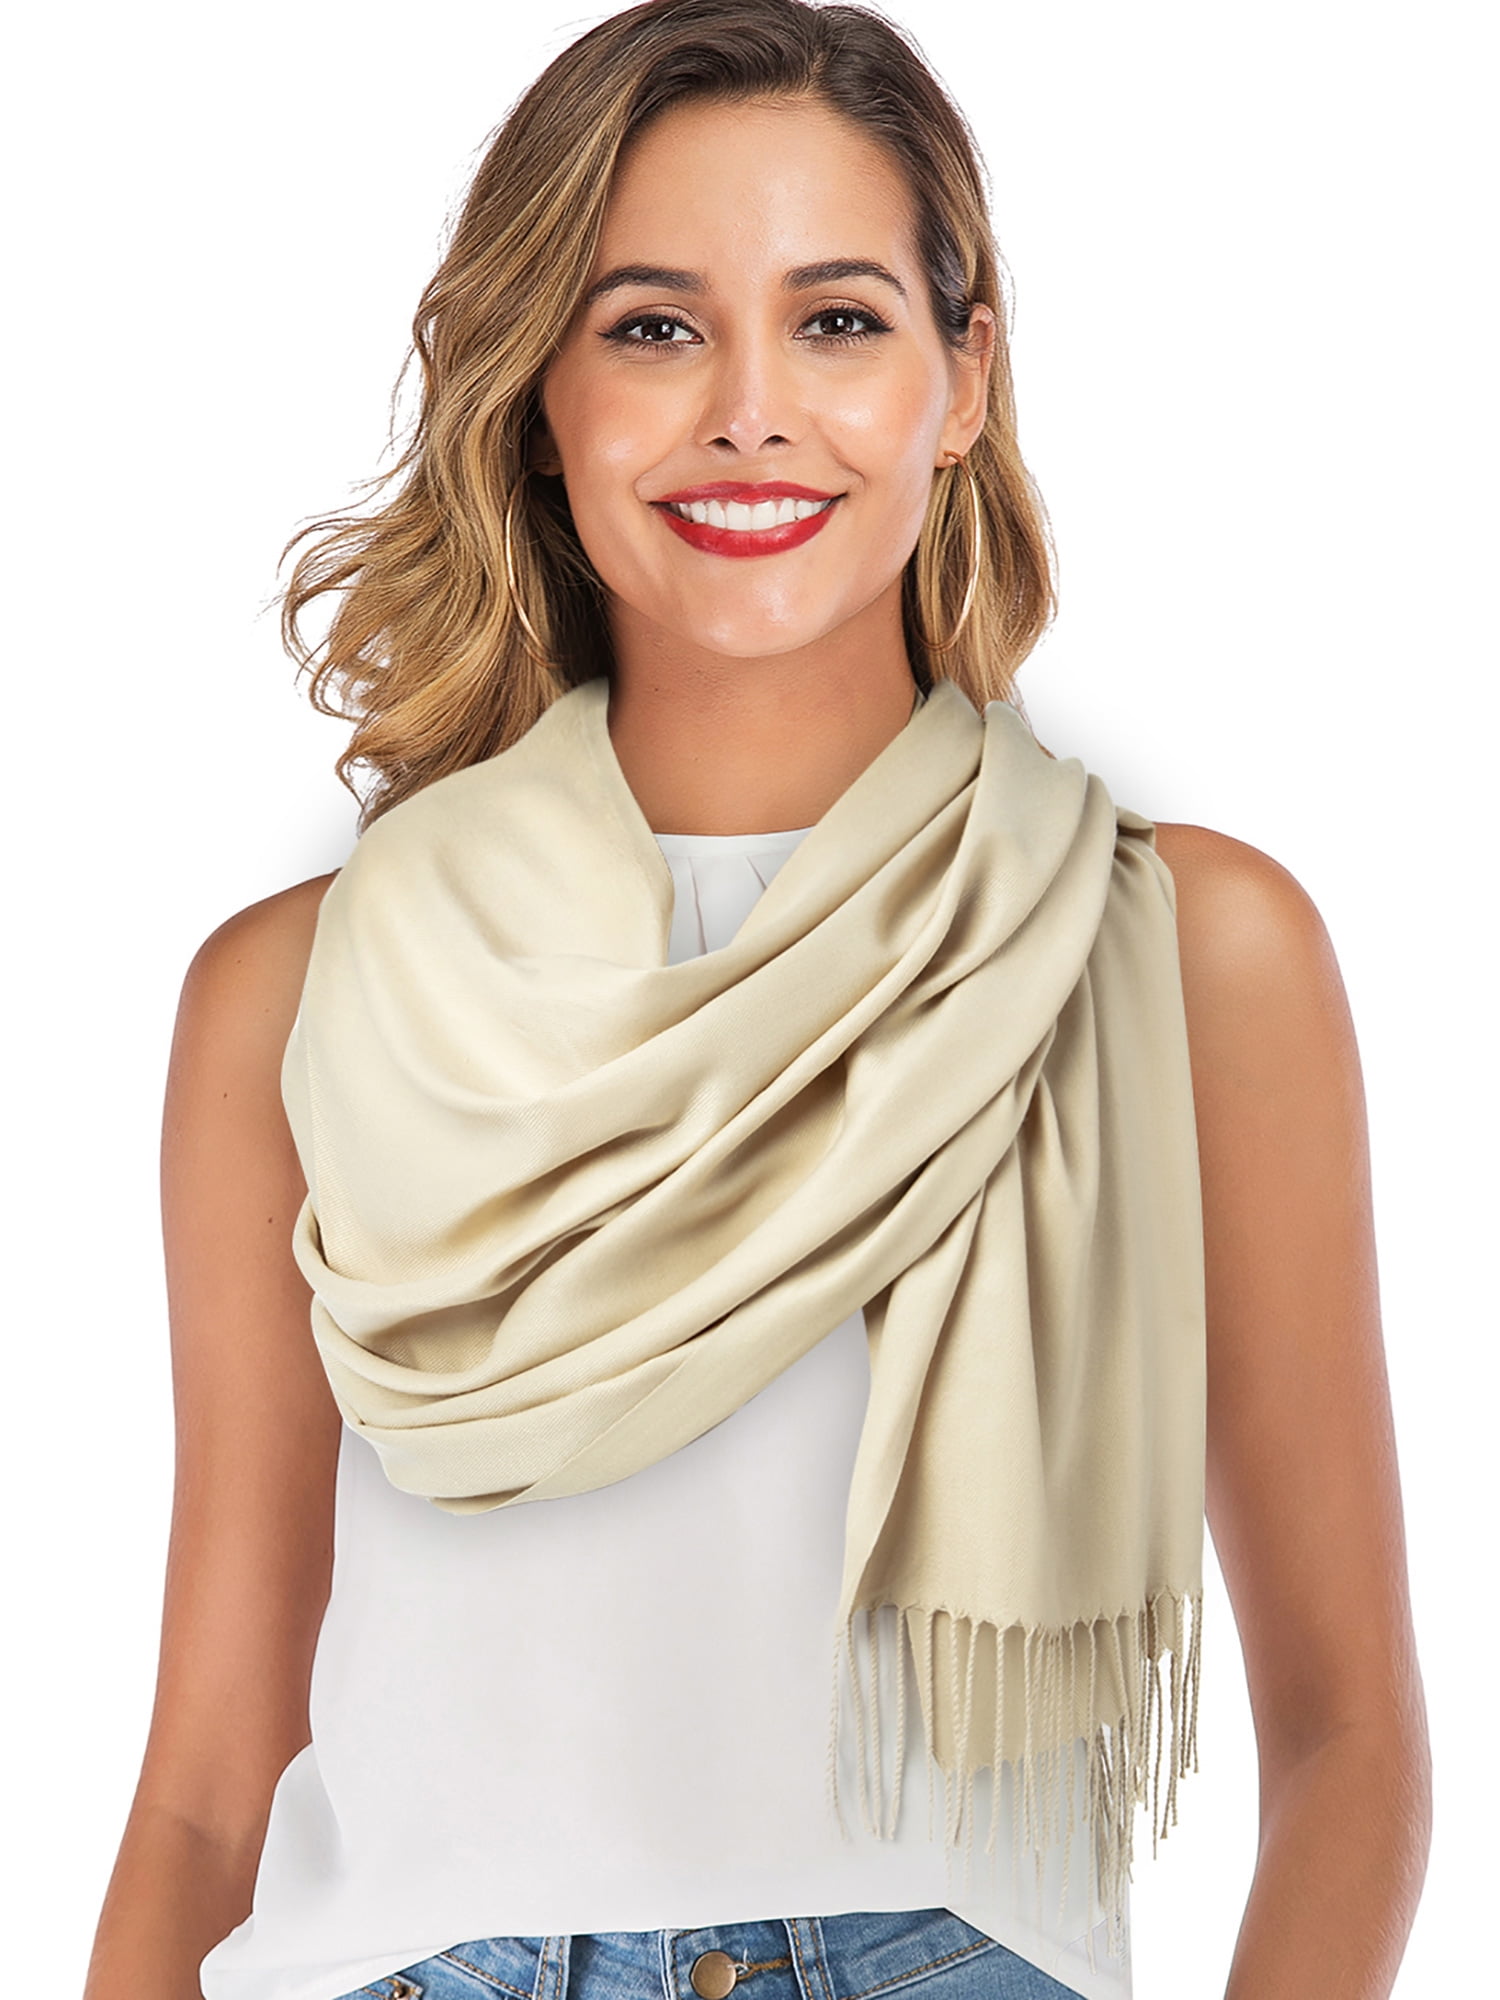 Premium Cashmere Pashmina Scarf for Women Large Shawls and Wraps for Women Thick Soft Lightweight Scarfs Ladies Scarves for Women Wedding Wraps Womens Gifts for Her Ladies Gifts